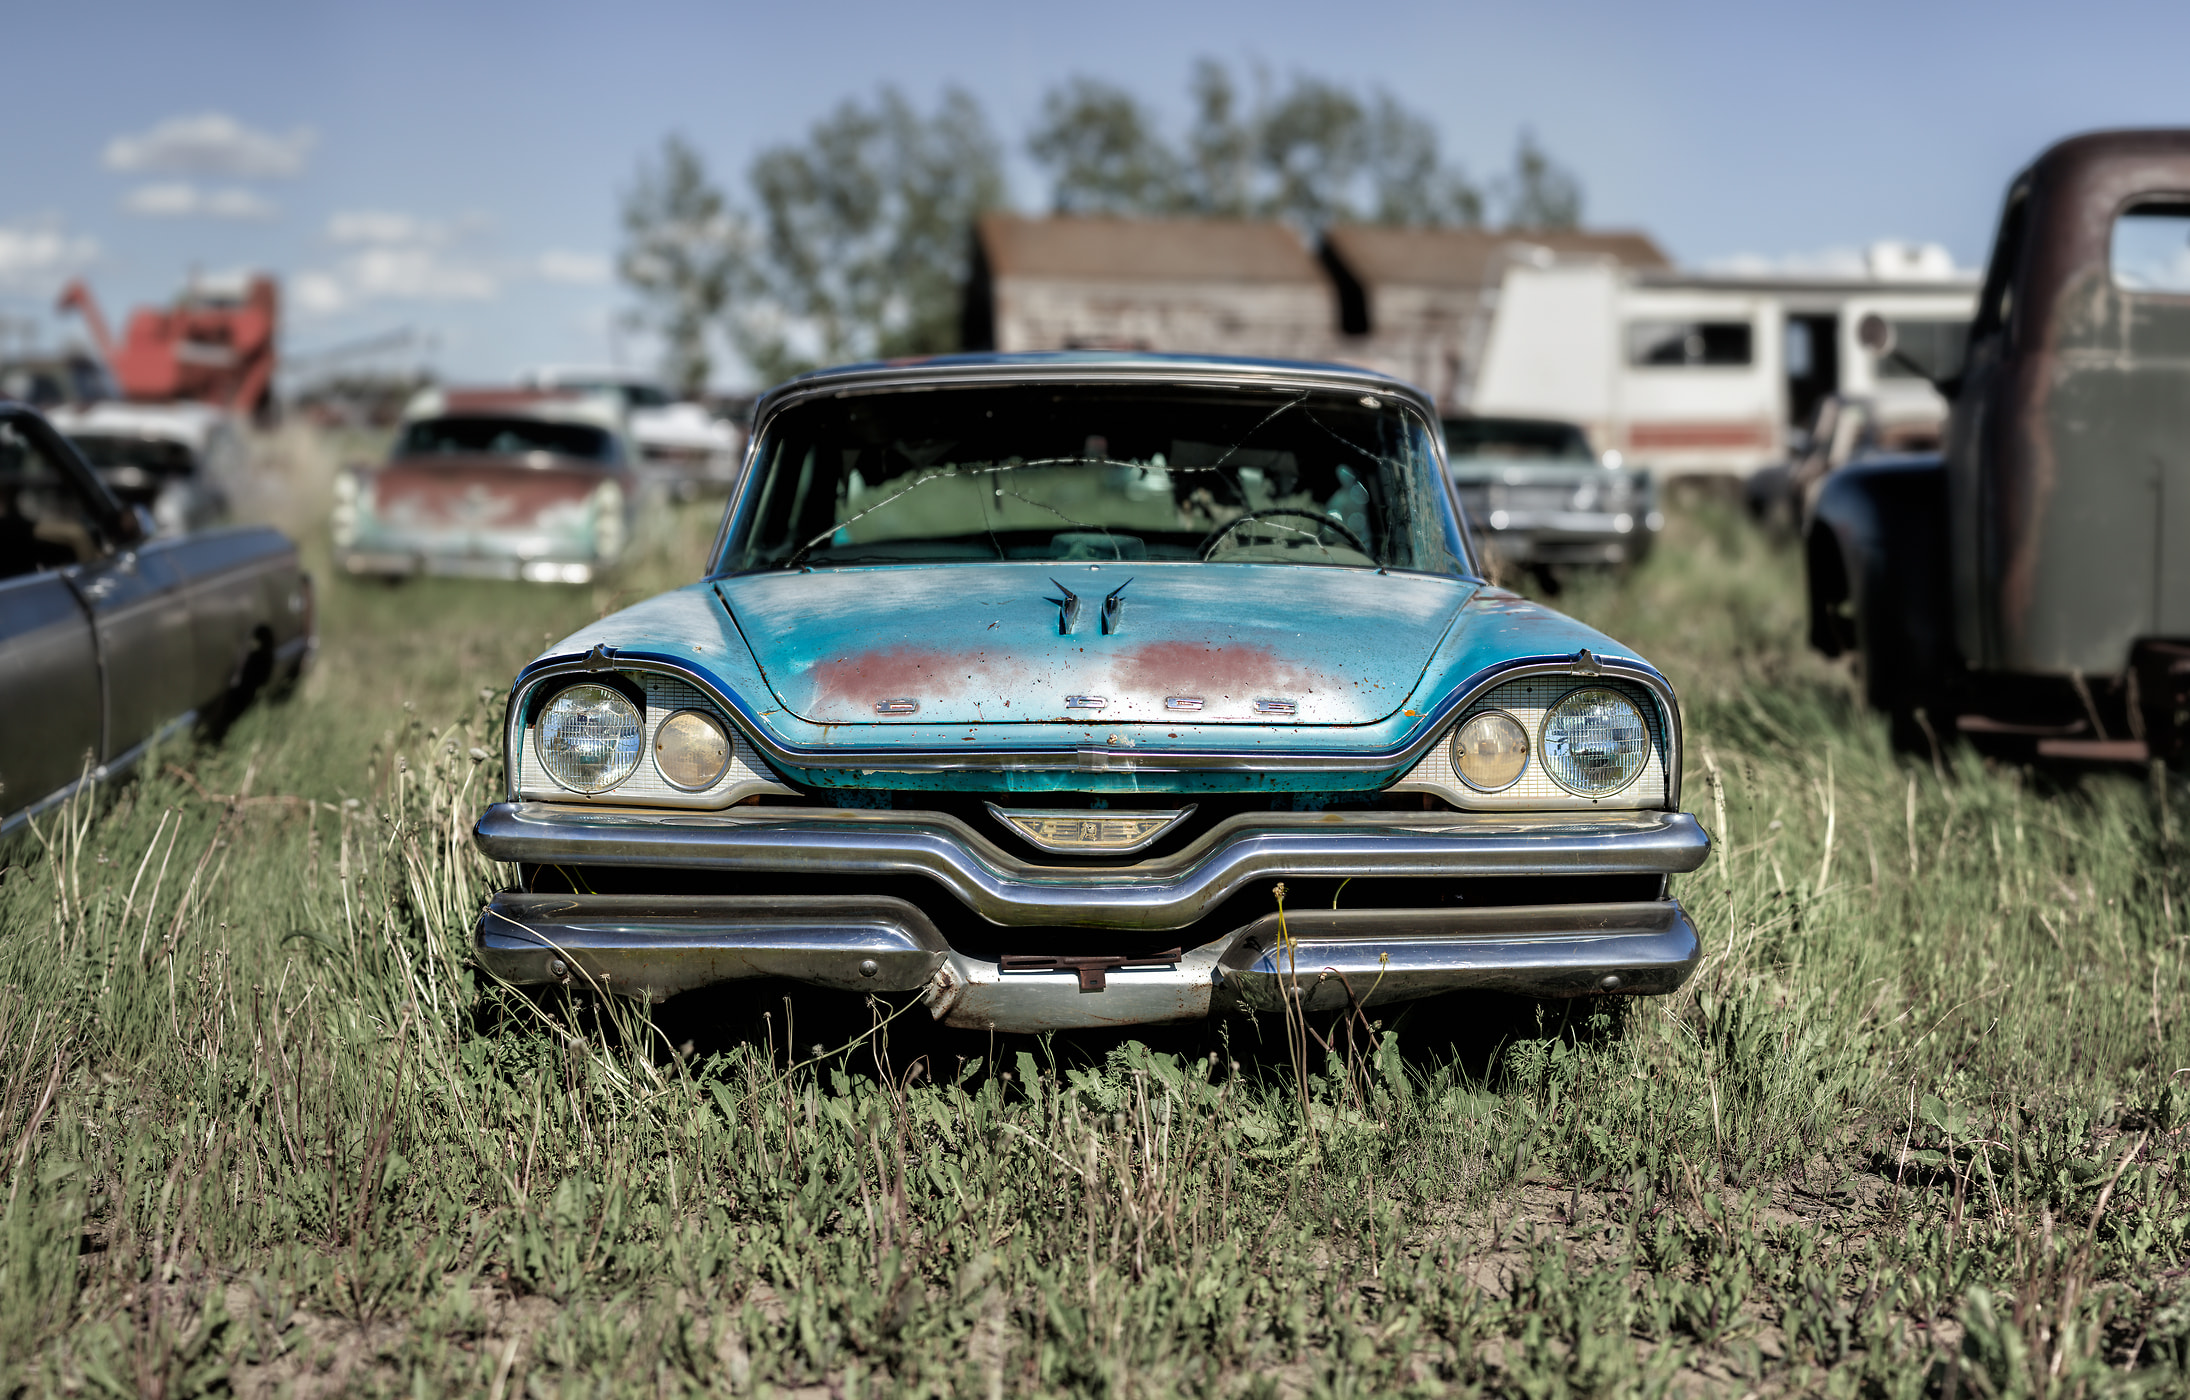 1,282 megapixels! A very high resolution, large-format VAST photo print of an old car; photograph created by Scott Dimond.